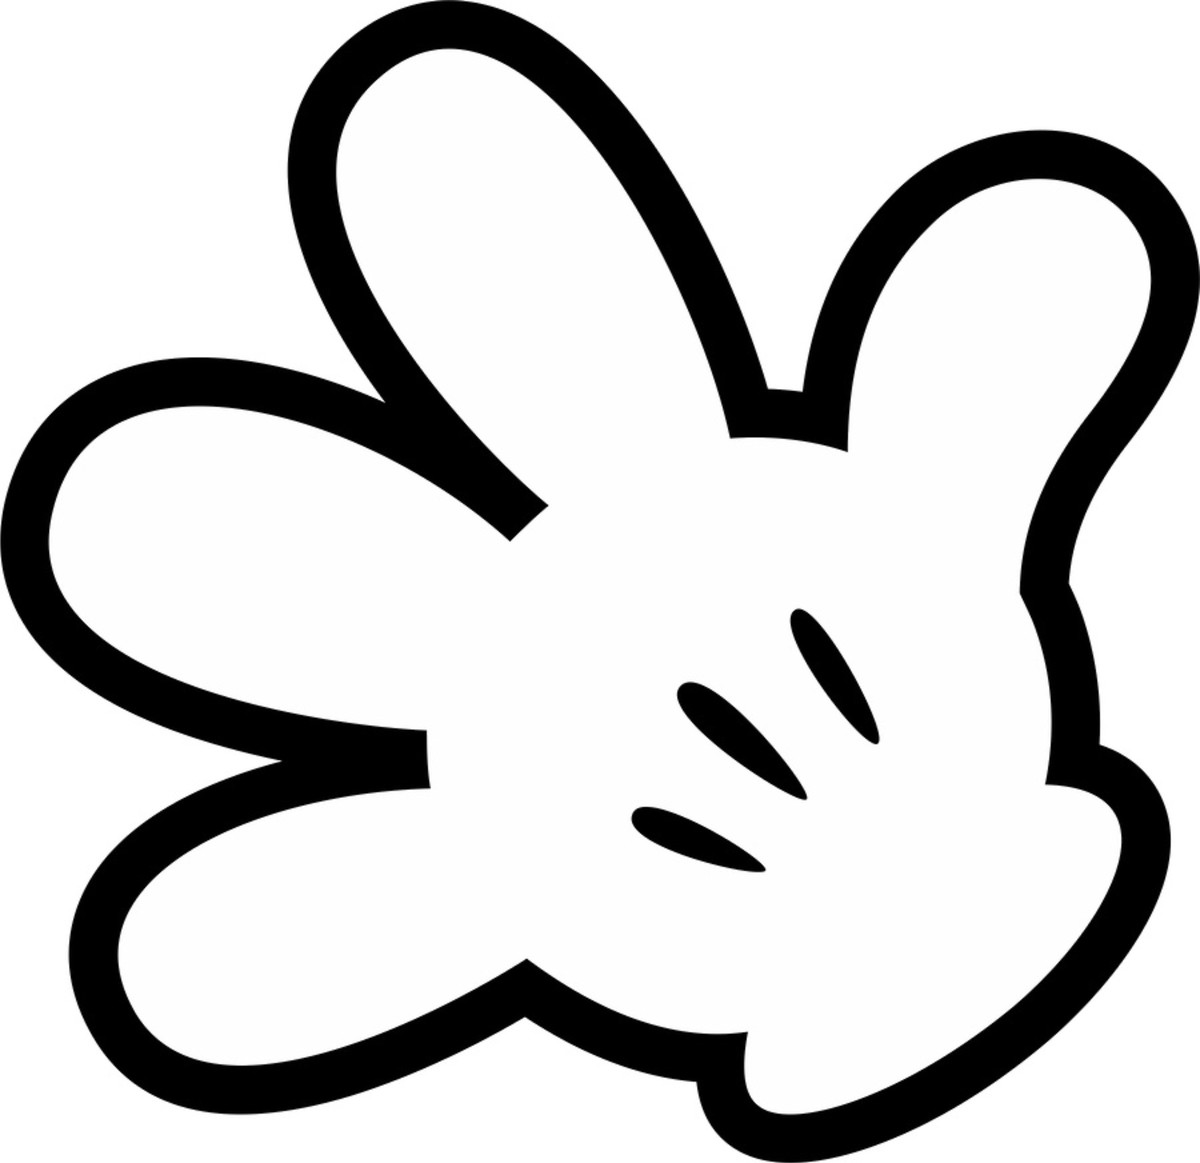 Free Mickey Hand Cliparts, Download Free Clip Art, Free Clip